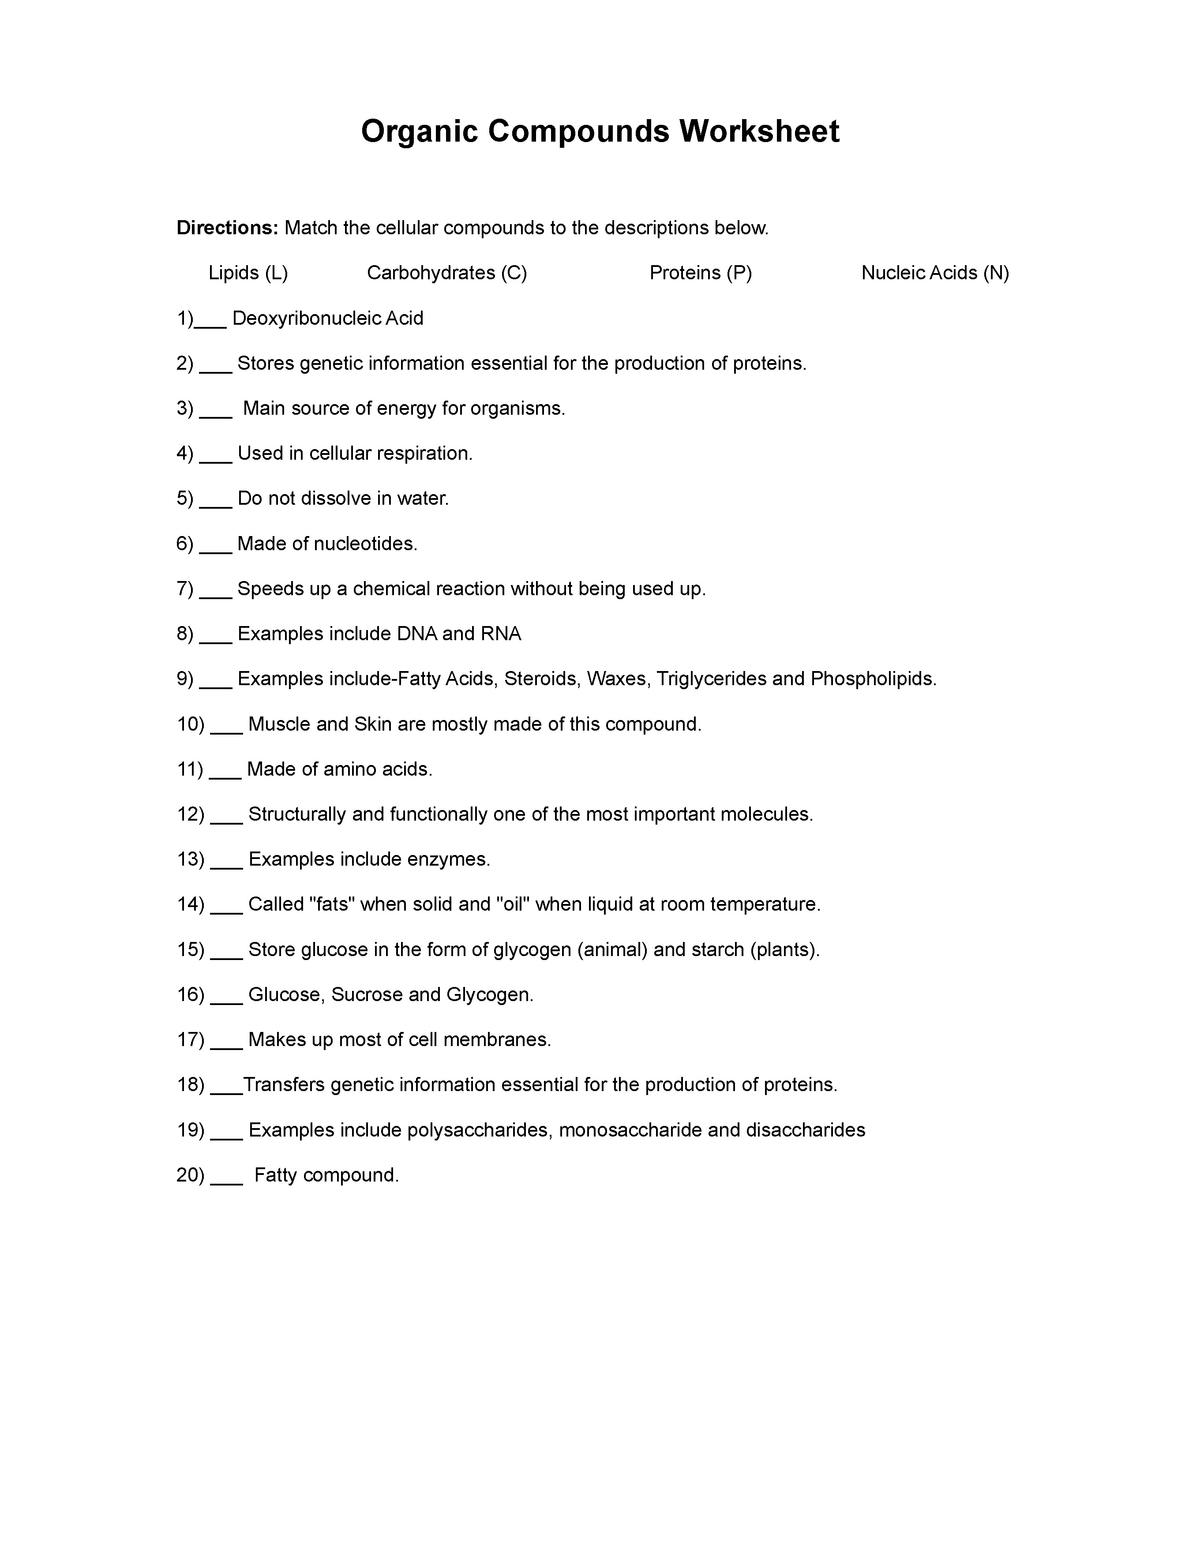 organic-compounds-worksheet-organic-compounds-worksheet-directions-match-the-cellular